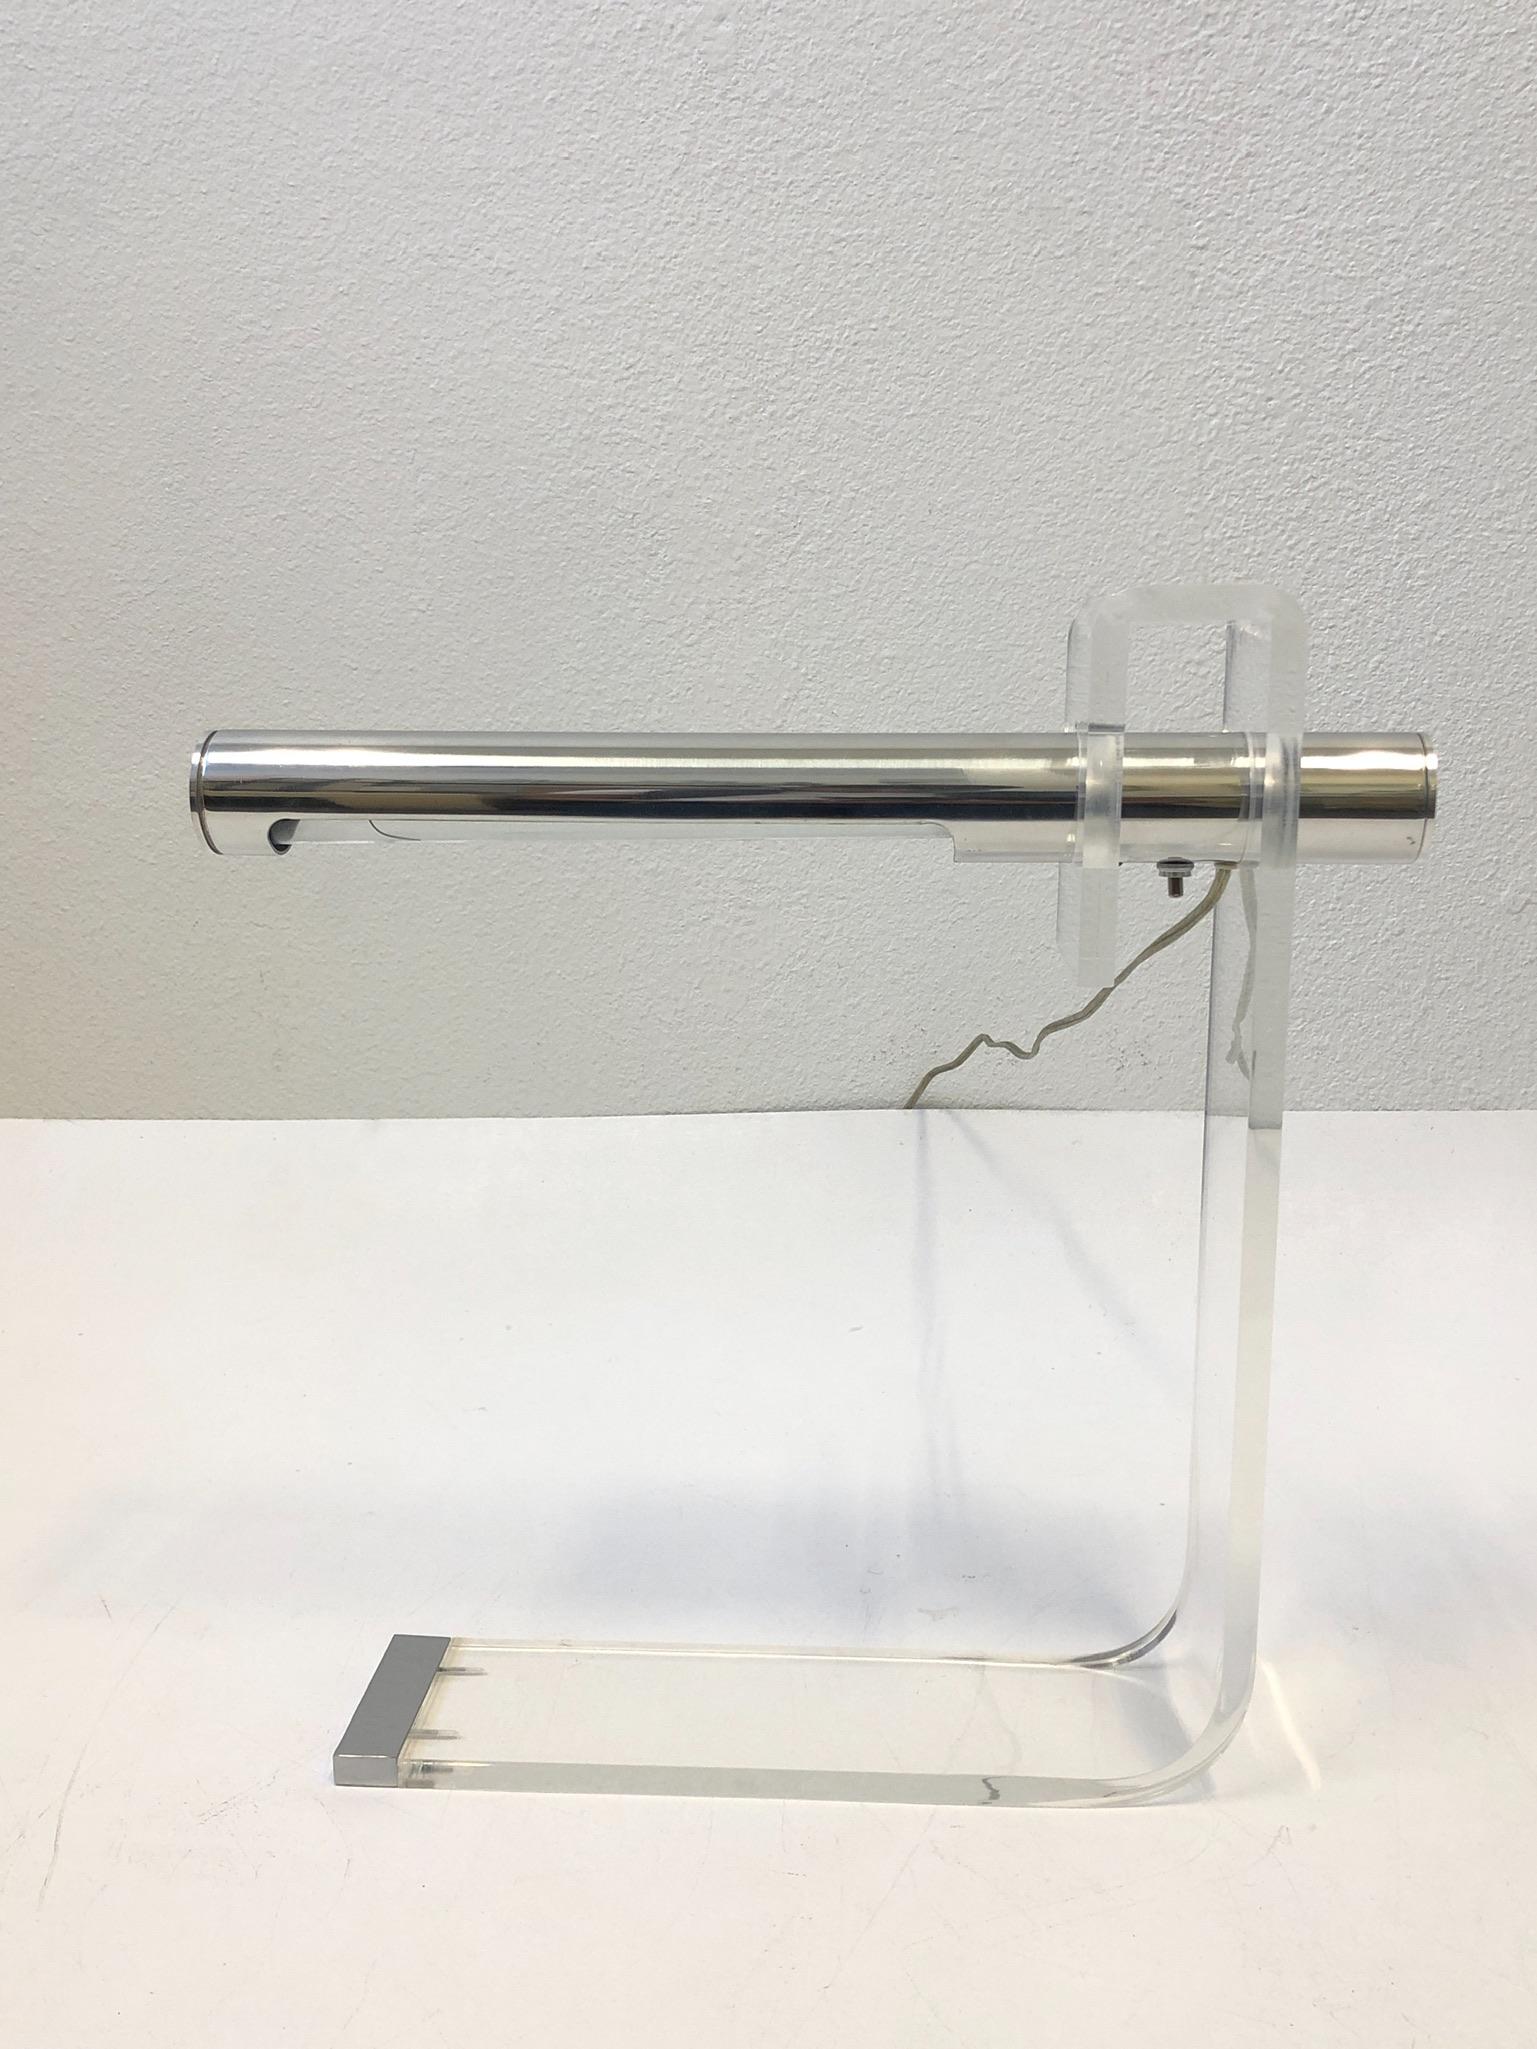 1970s clear Lucite and polish aluminum table lamp or desk lamp design by Robert Sonneman. The lamp has been newly rewired and professionally polished.
Measurements: 18” wide, 4” deep and 18” high.